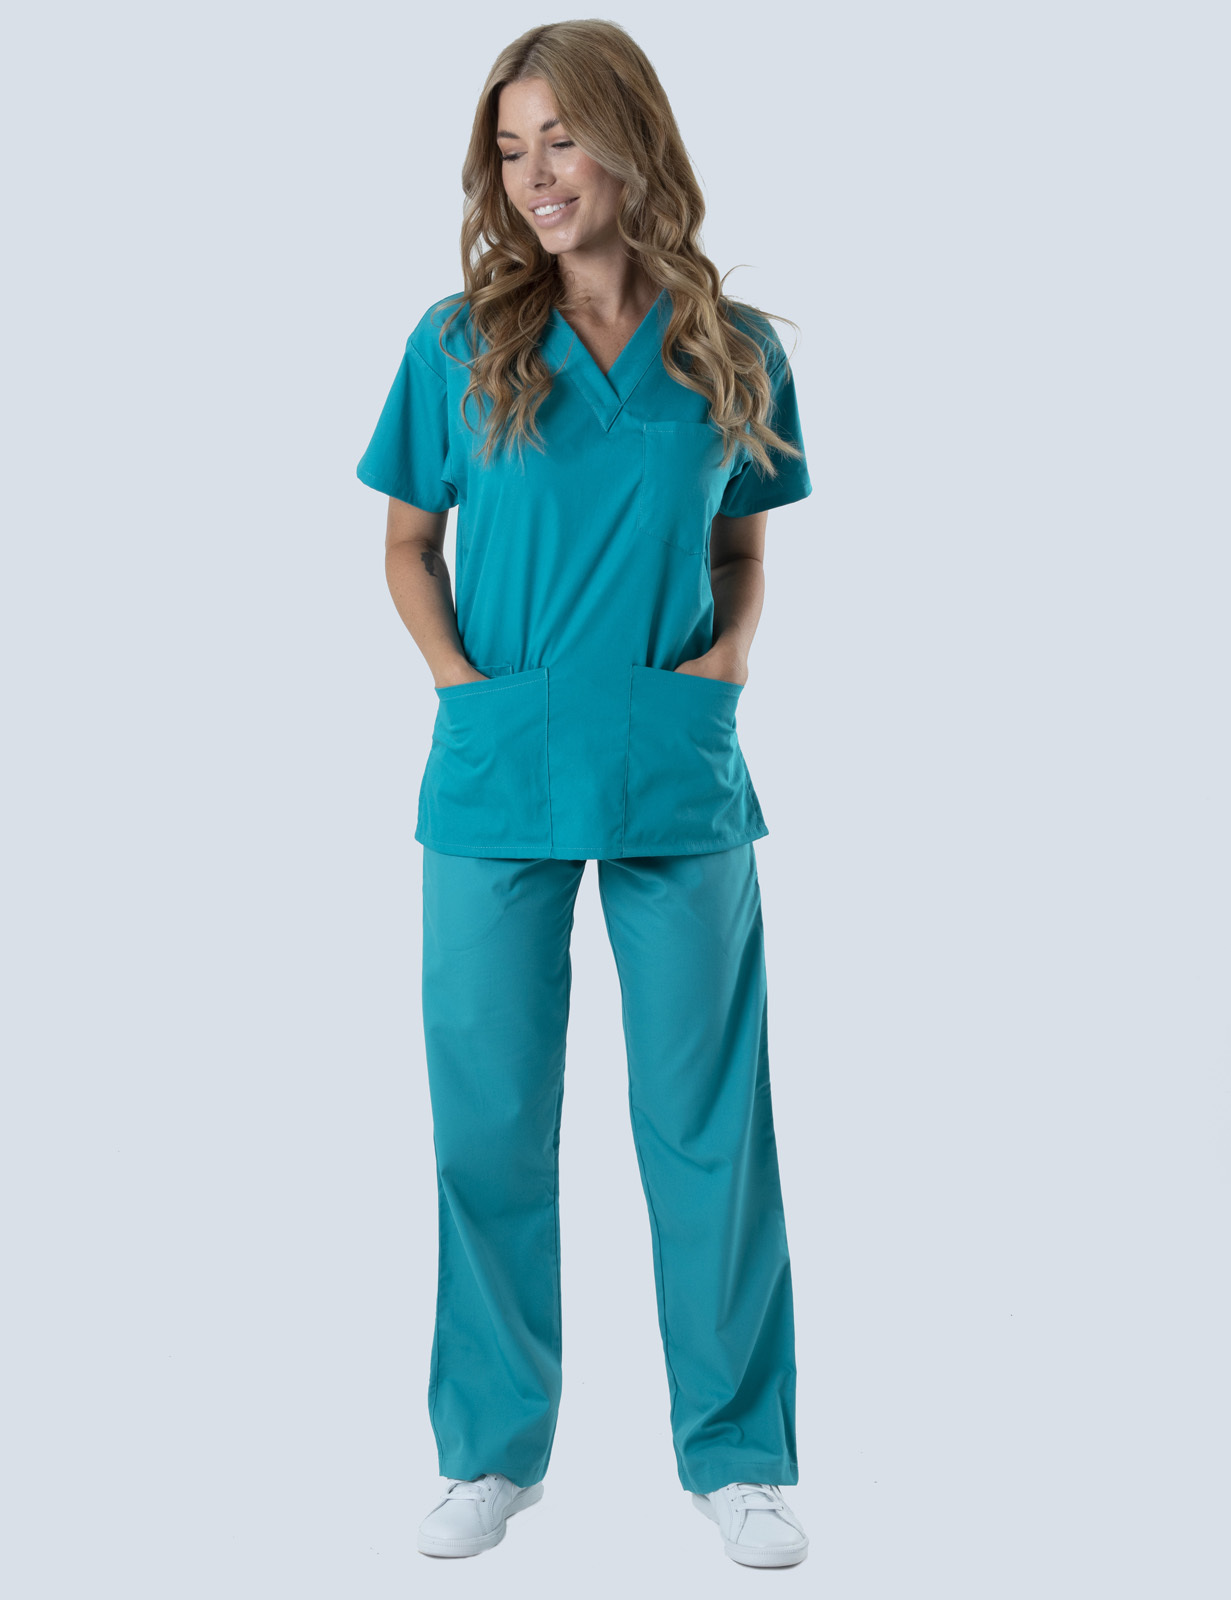 Maleny Hospital - AIN (4 Pocket Scrub Top and Cargo Pants in Teal incl Logos)